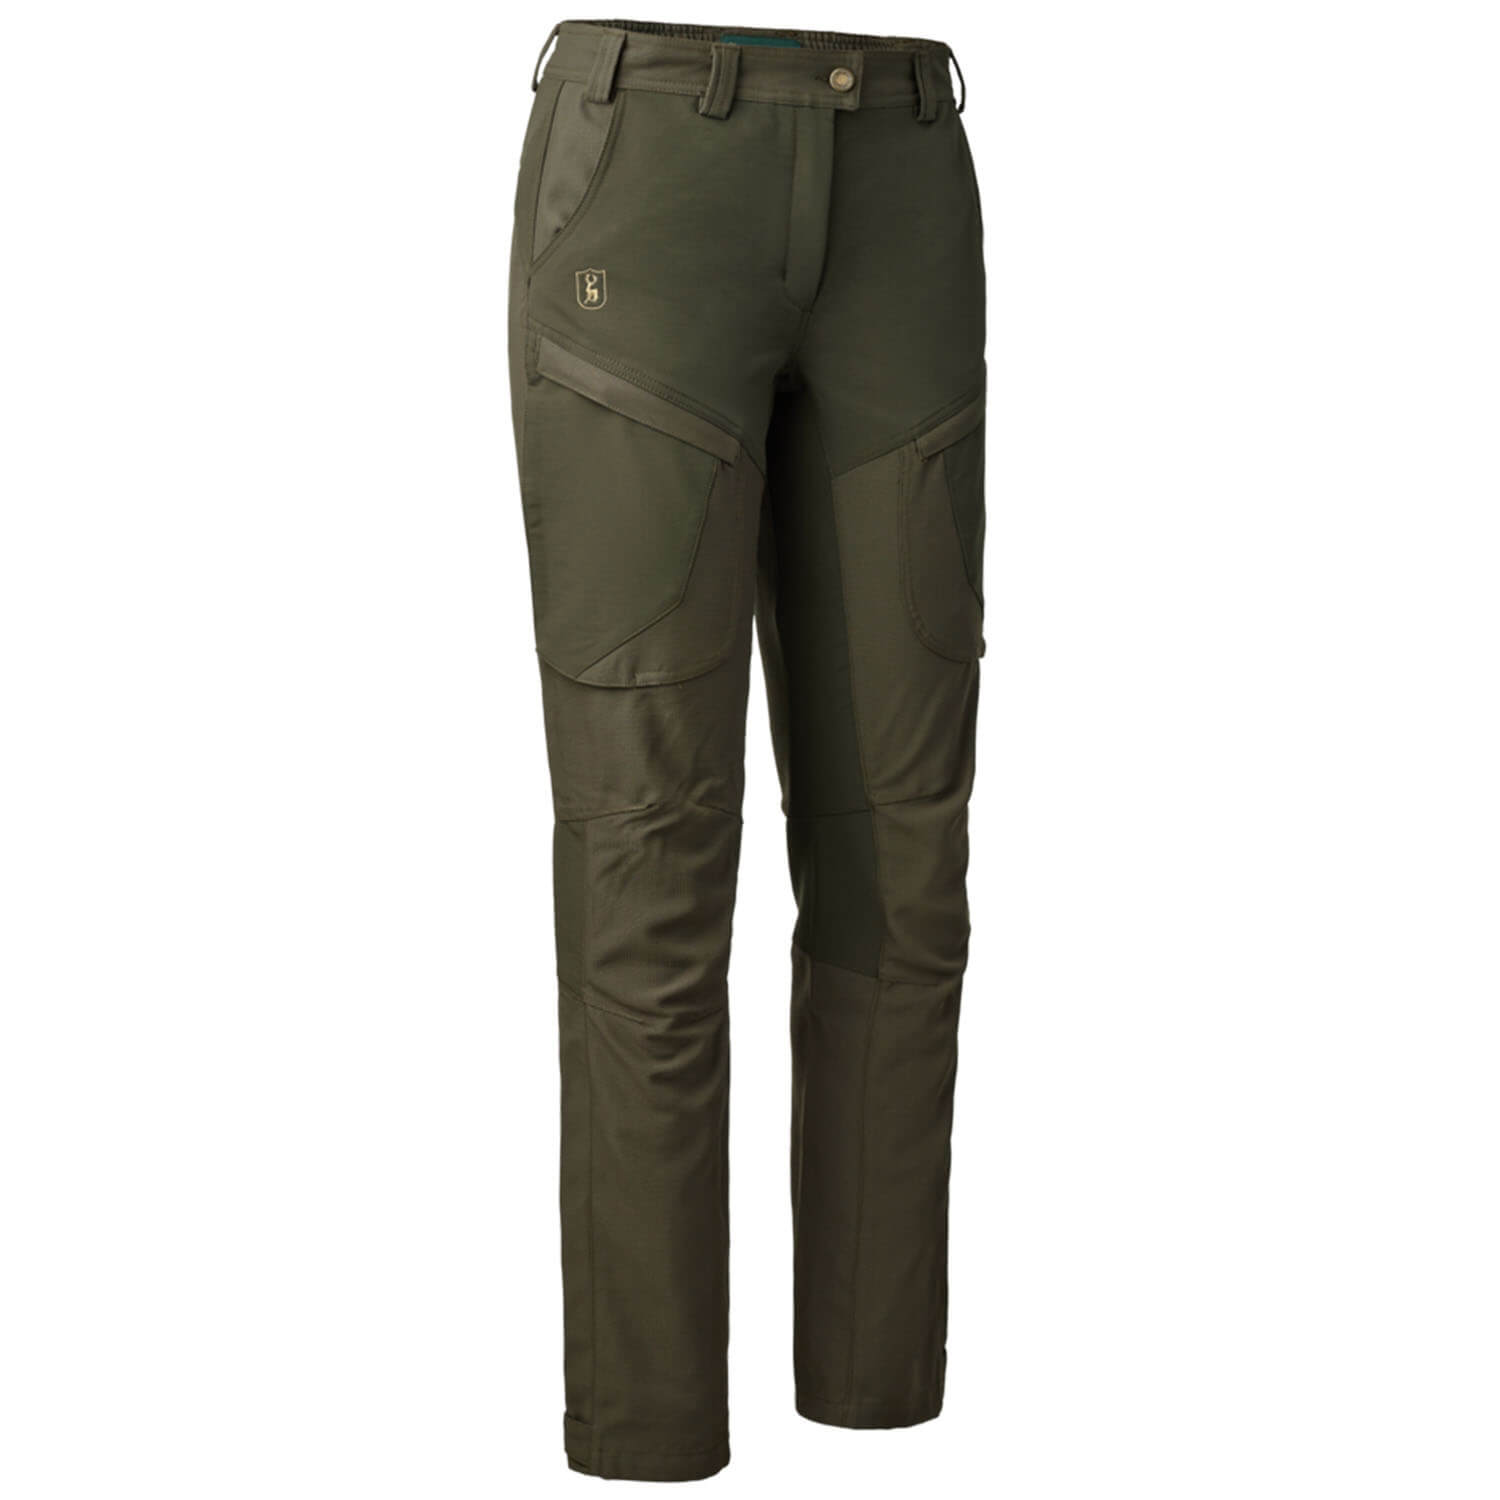 Deerhunter trousers Lady Ann Extreme - Hunting Trousers